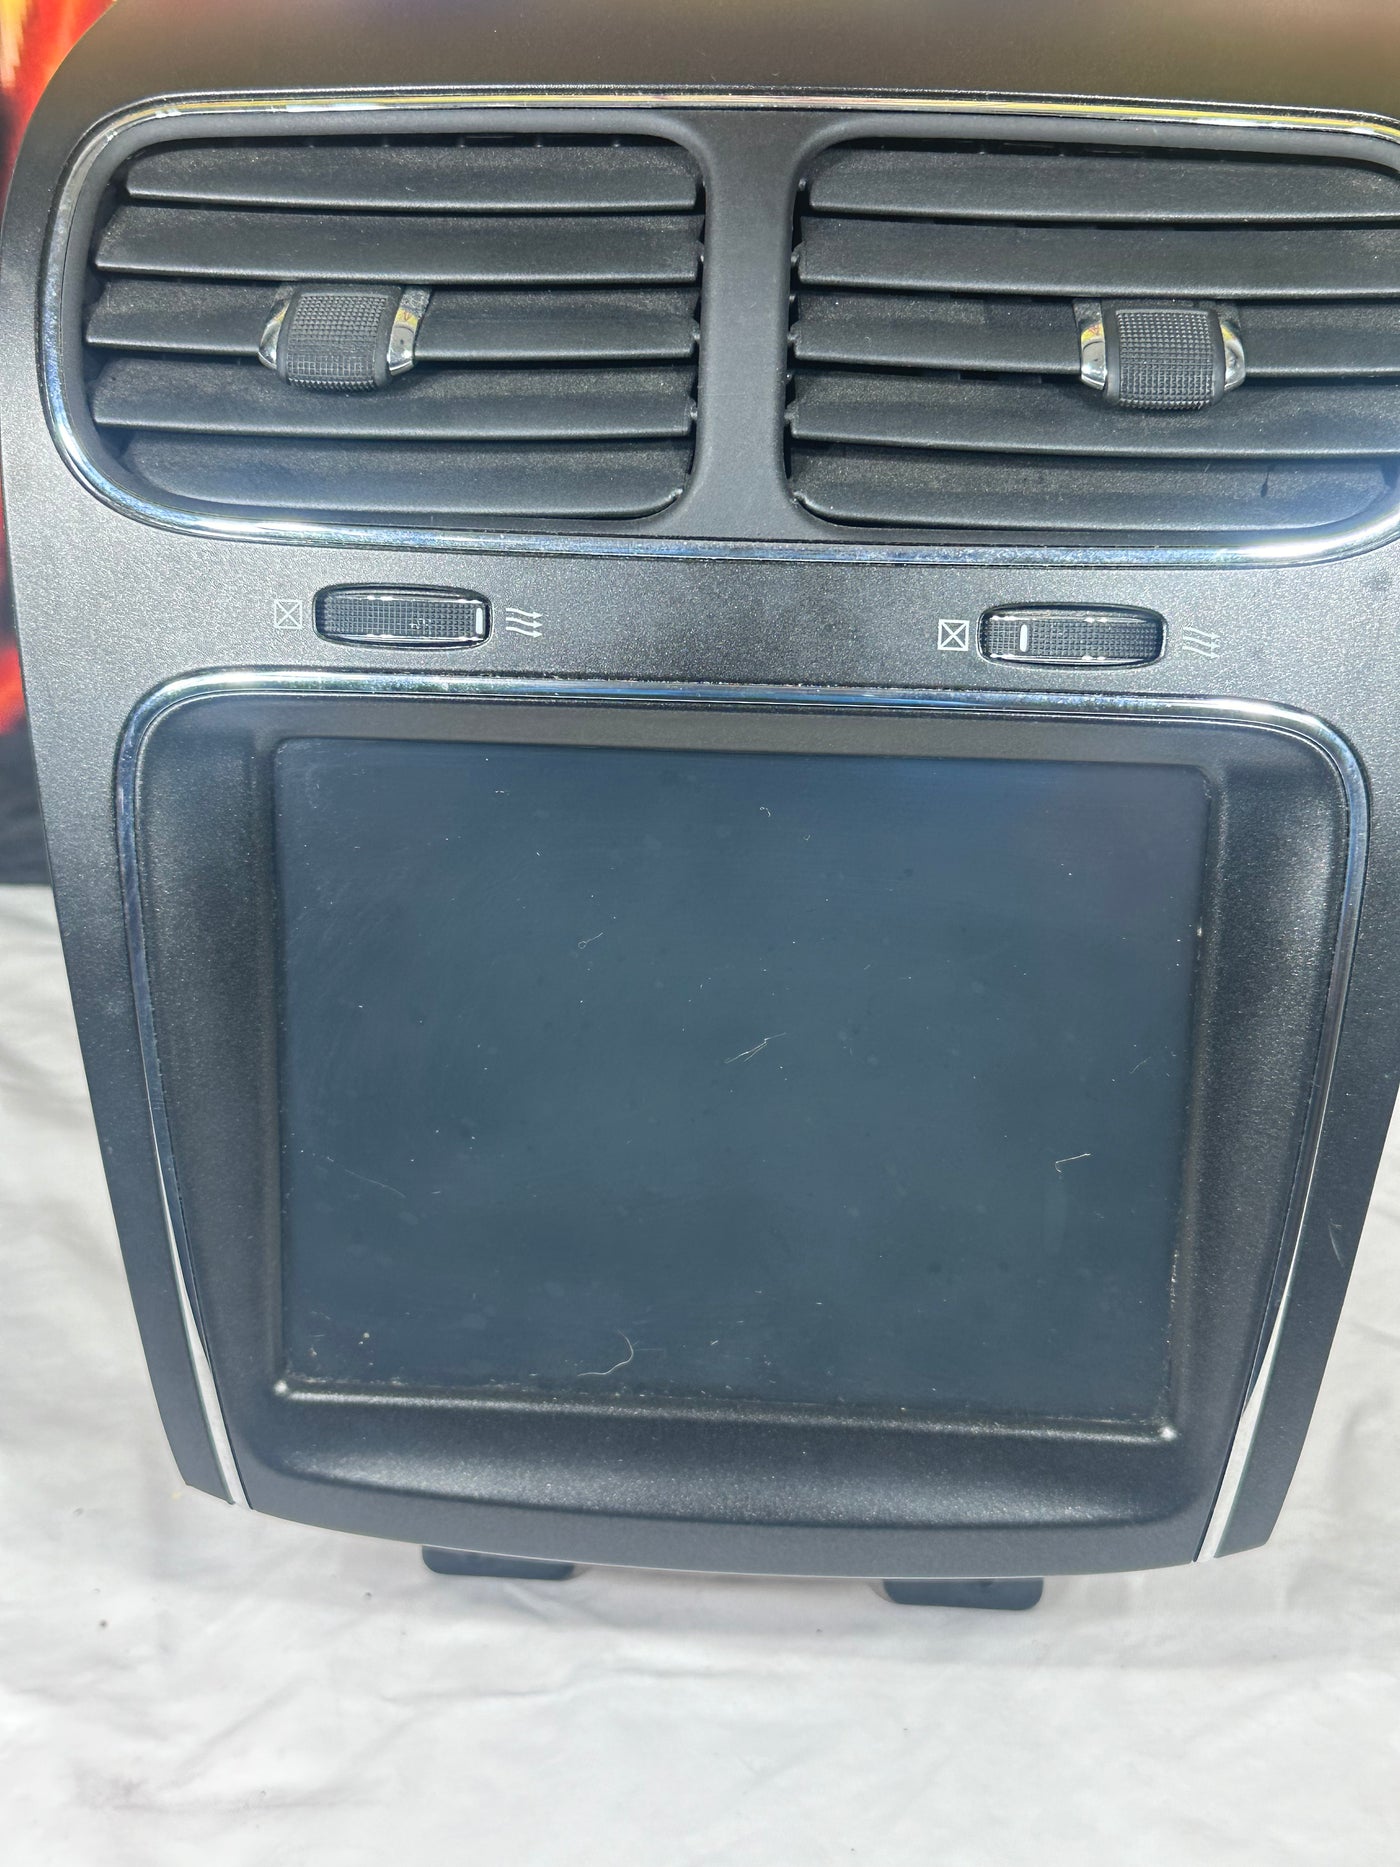 2011 - 2016 Dodge Journey OEM 8.4" Navigation Touch Screen Display Monitor